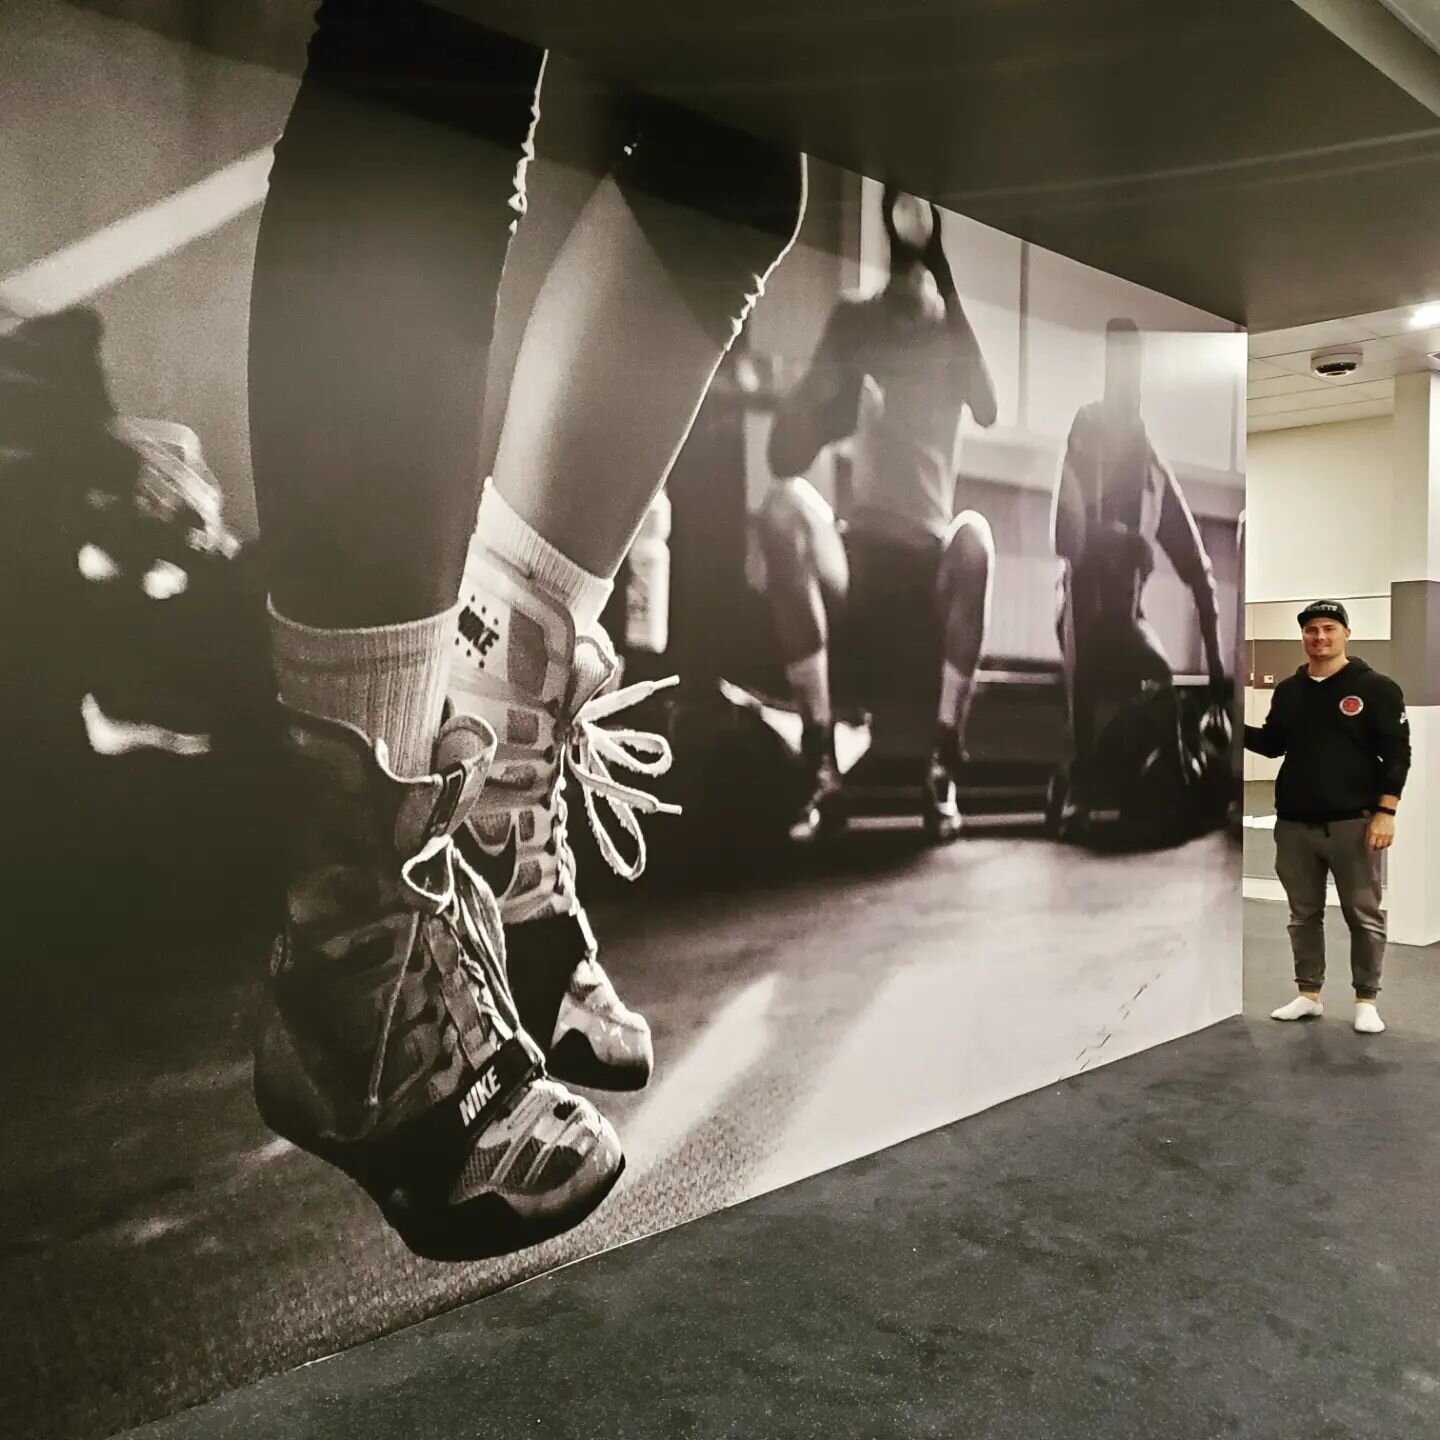 This awesome gym mural helps keep it's members inspired! Let's go! 💪💪💪 
Dallas for scale. #yegbusiness
#campvinyl #fitness #wallwrap #wallmural #exercise